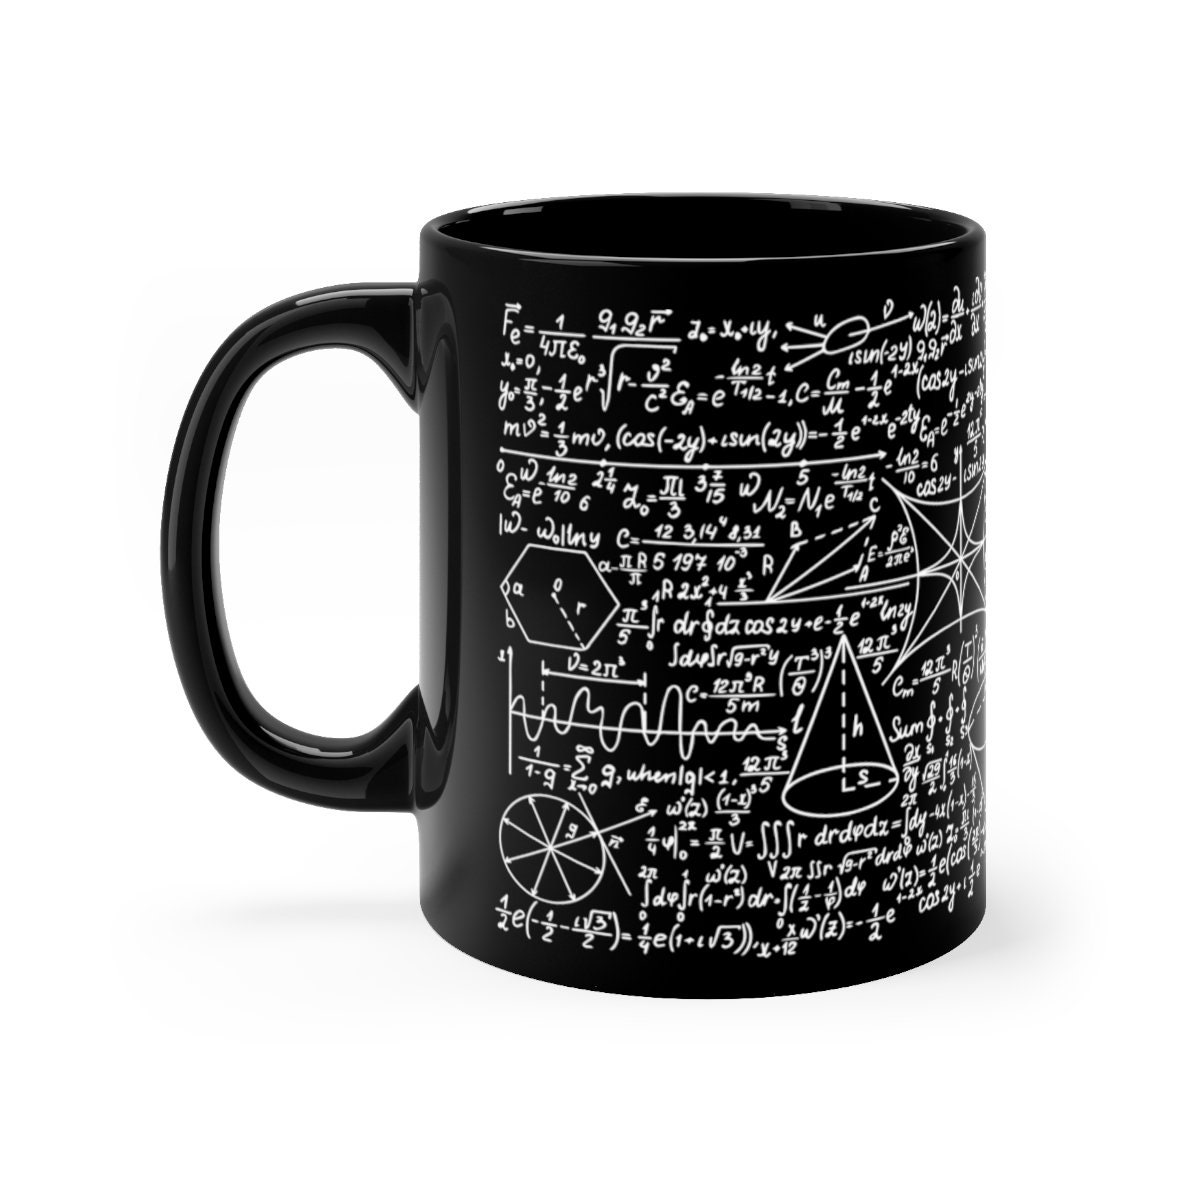 Mathematical Formulas Coffee Mug - Ponder Famous Math Equations While You  Enjoy Your Drink - Comes in a Fun Gift Box - by The Unemployed Philosophers